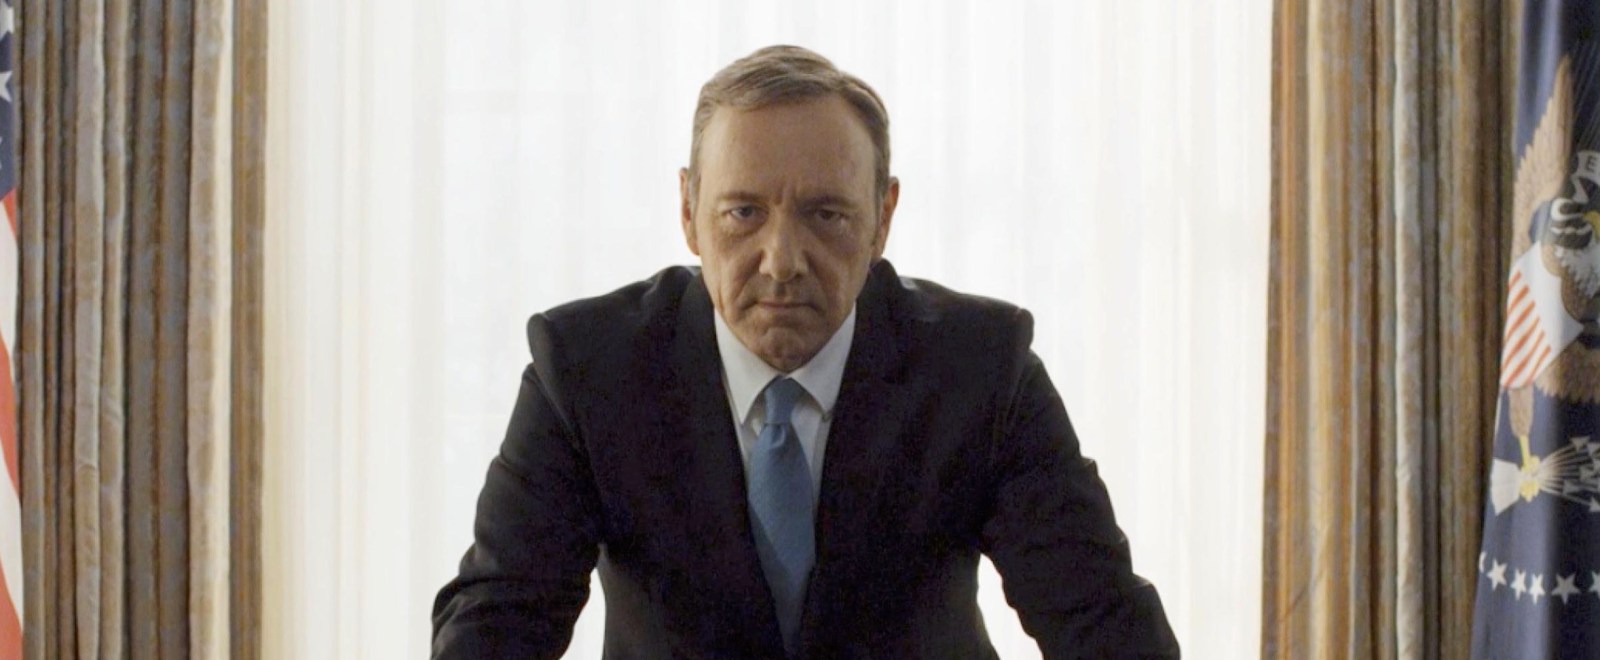 Kevin Spacey Must Pay $31 Million Over 'House Of Cards' Exit